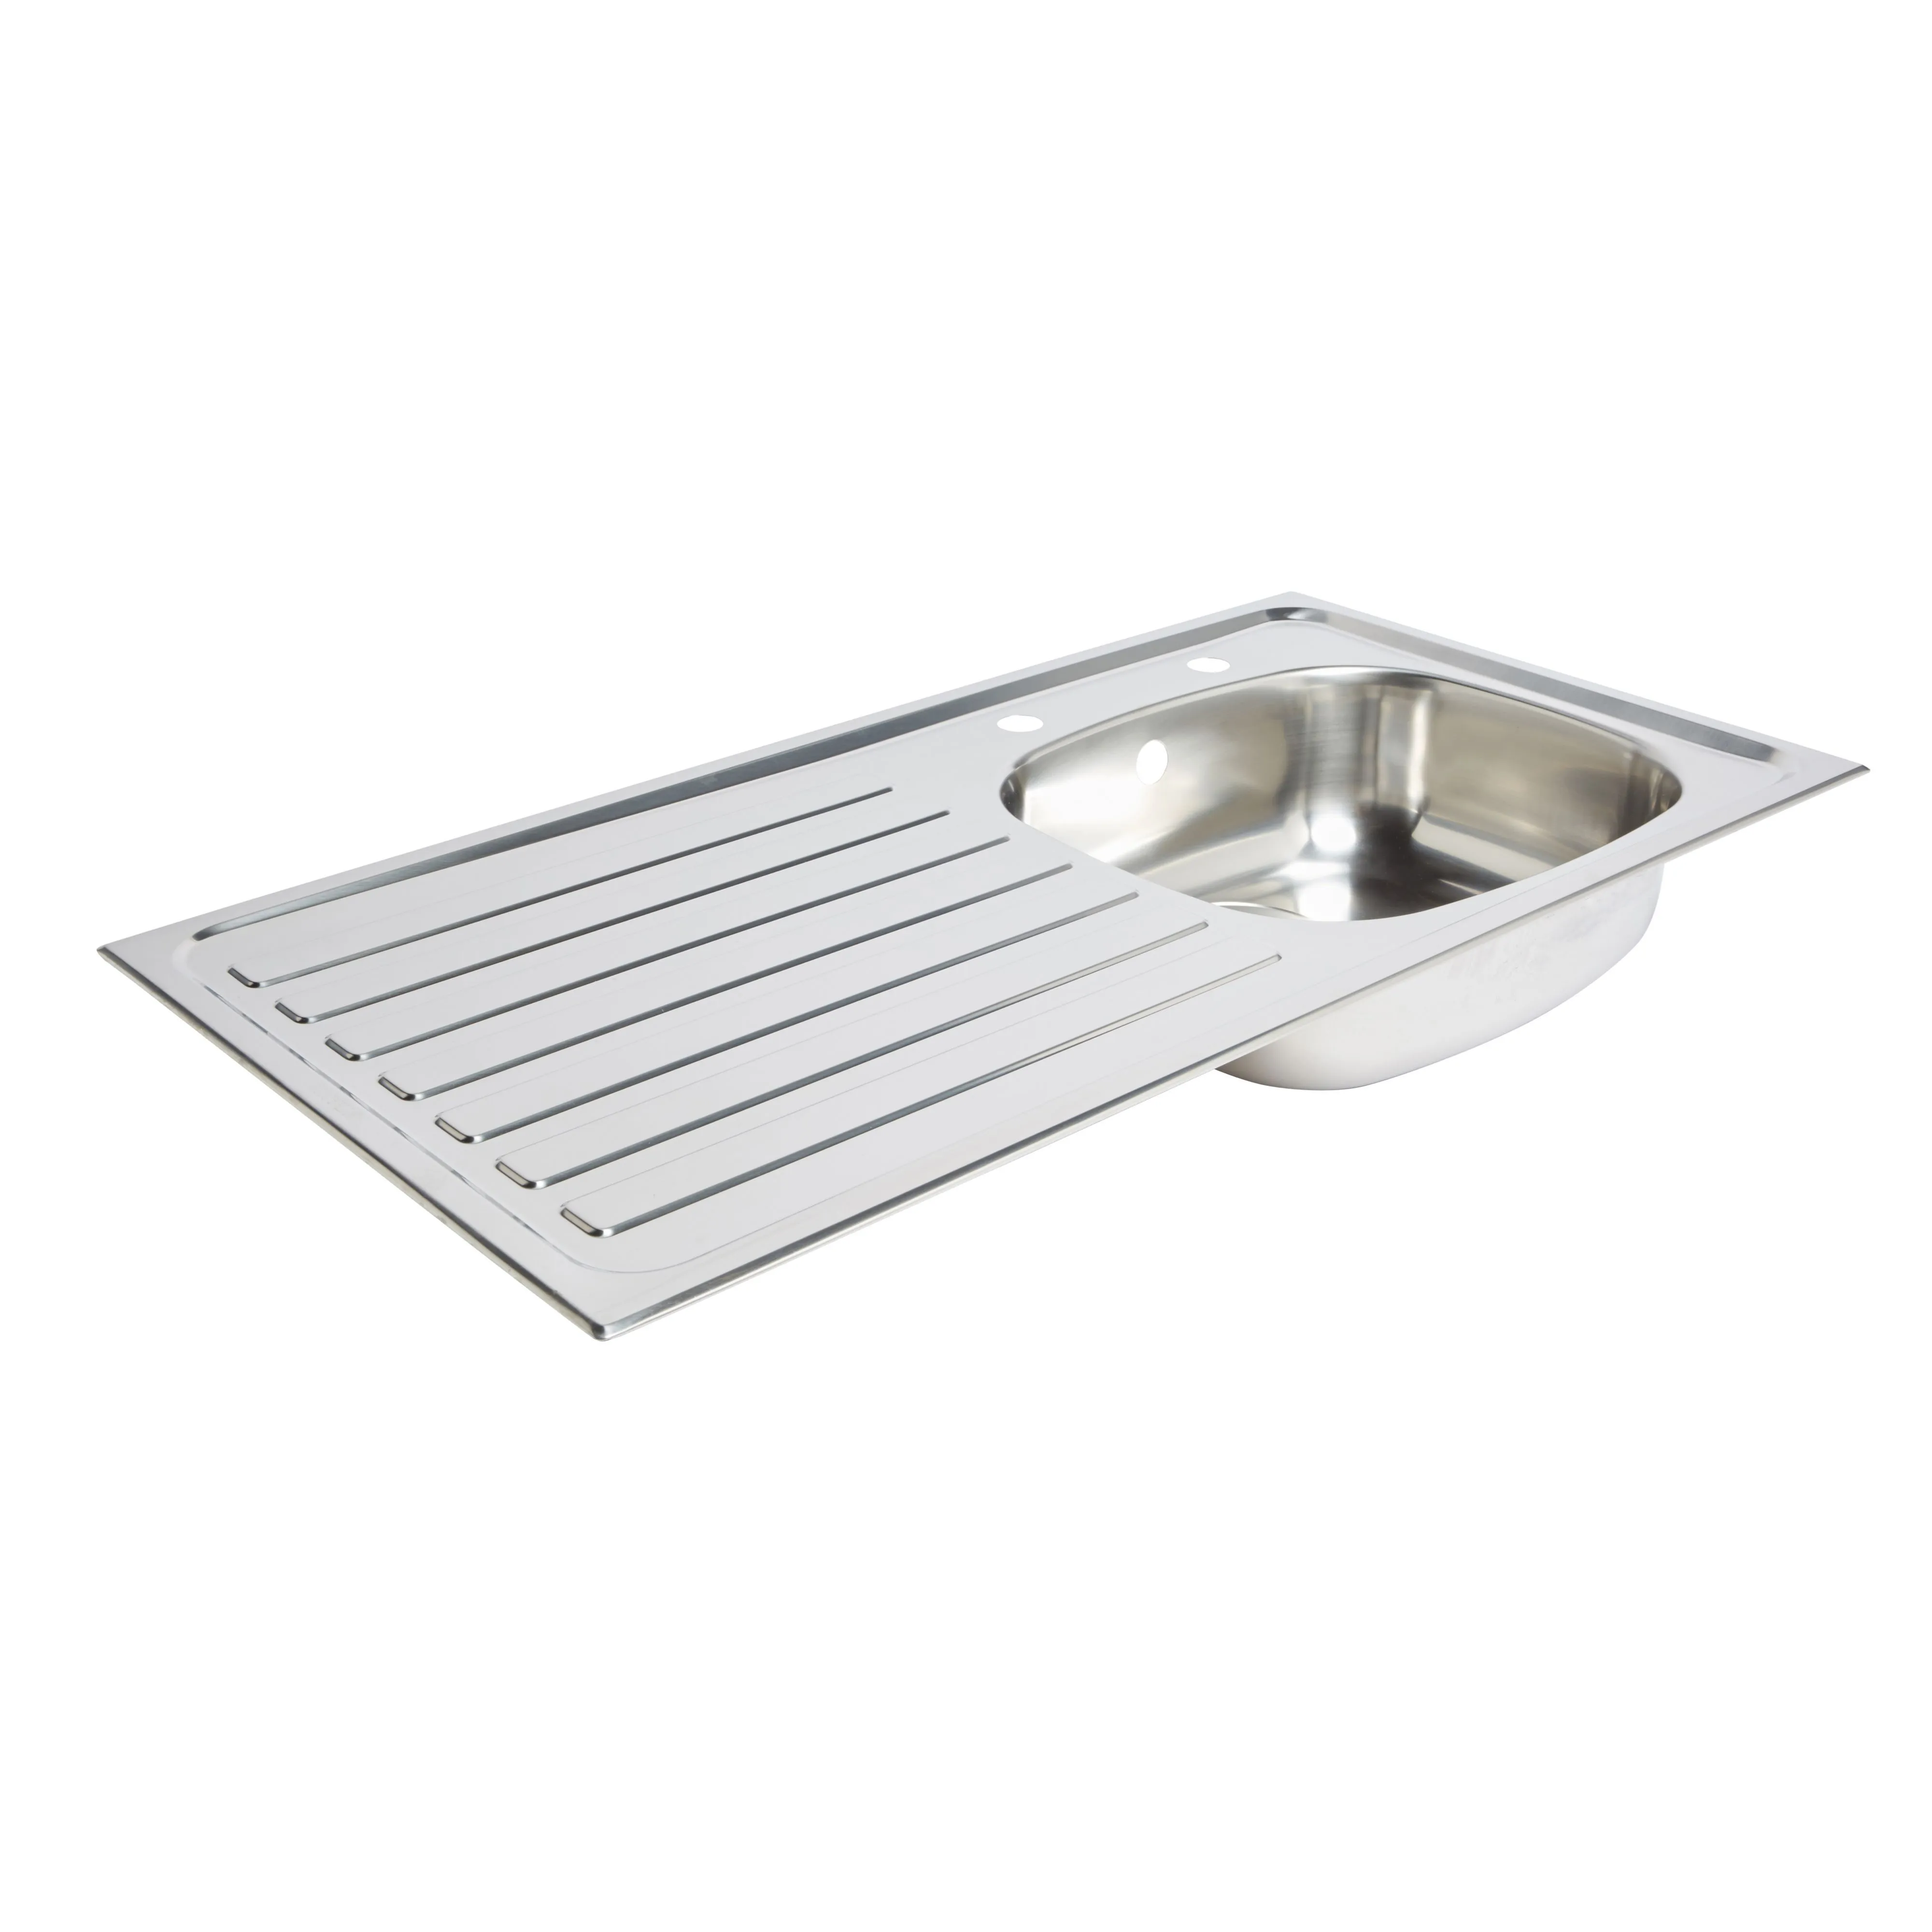 Utility Polished Stainless steel 1 Bowl Sink & drainer LH